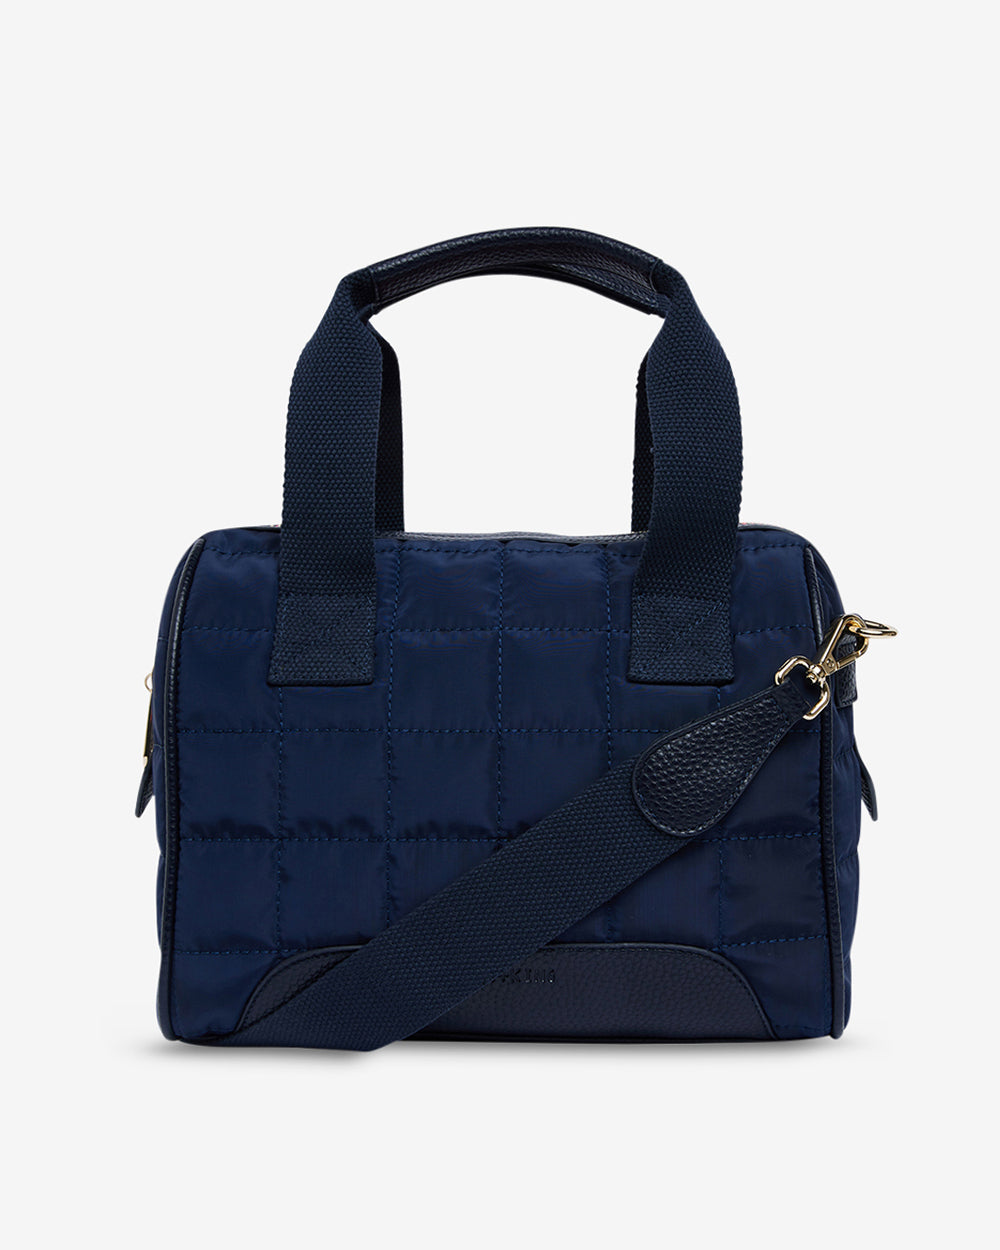 Hartley Doctors Bag - Quilted French Navy